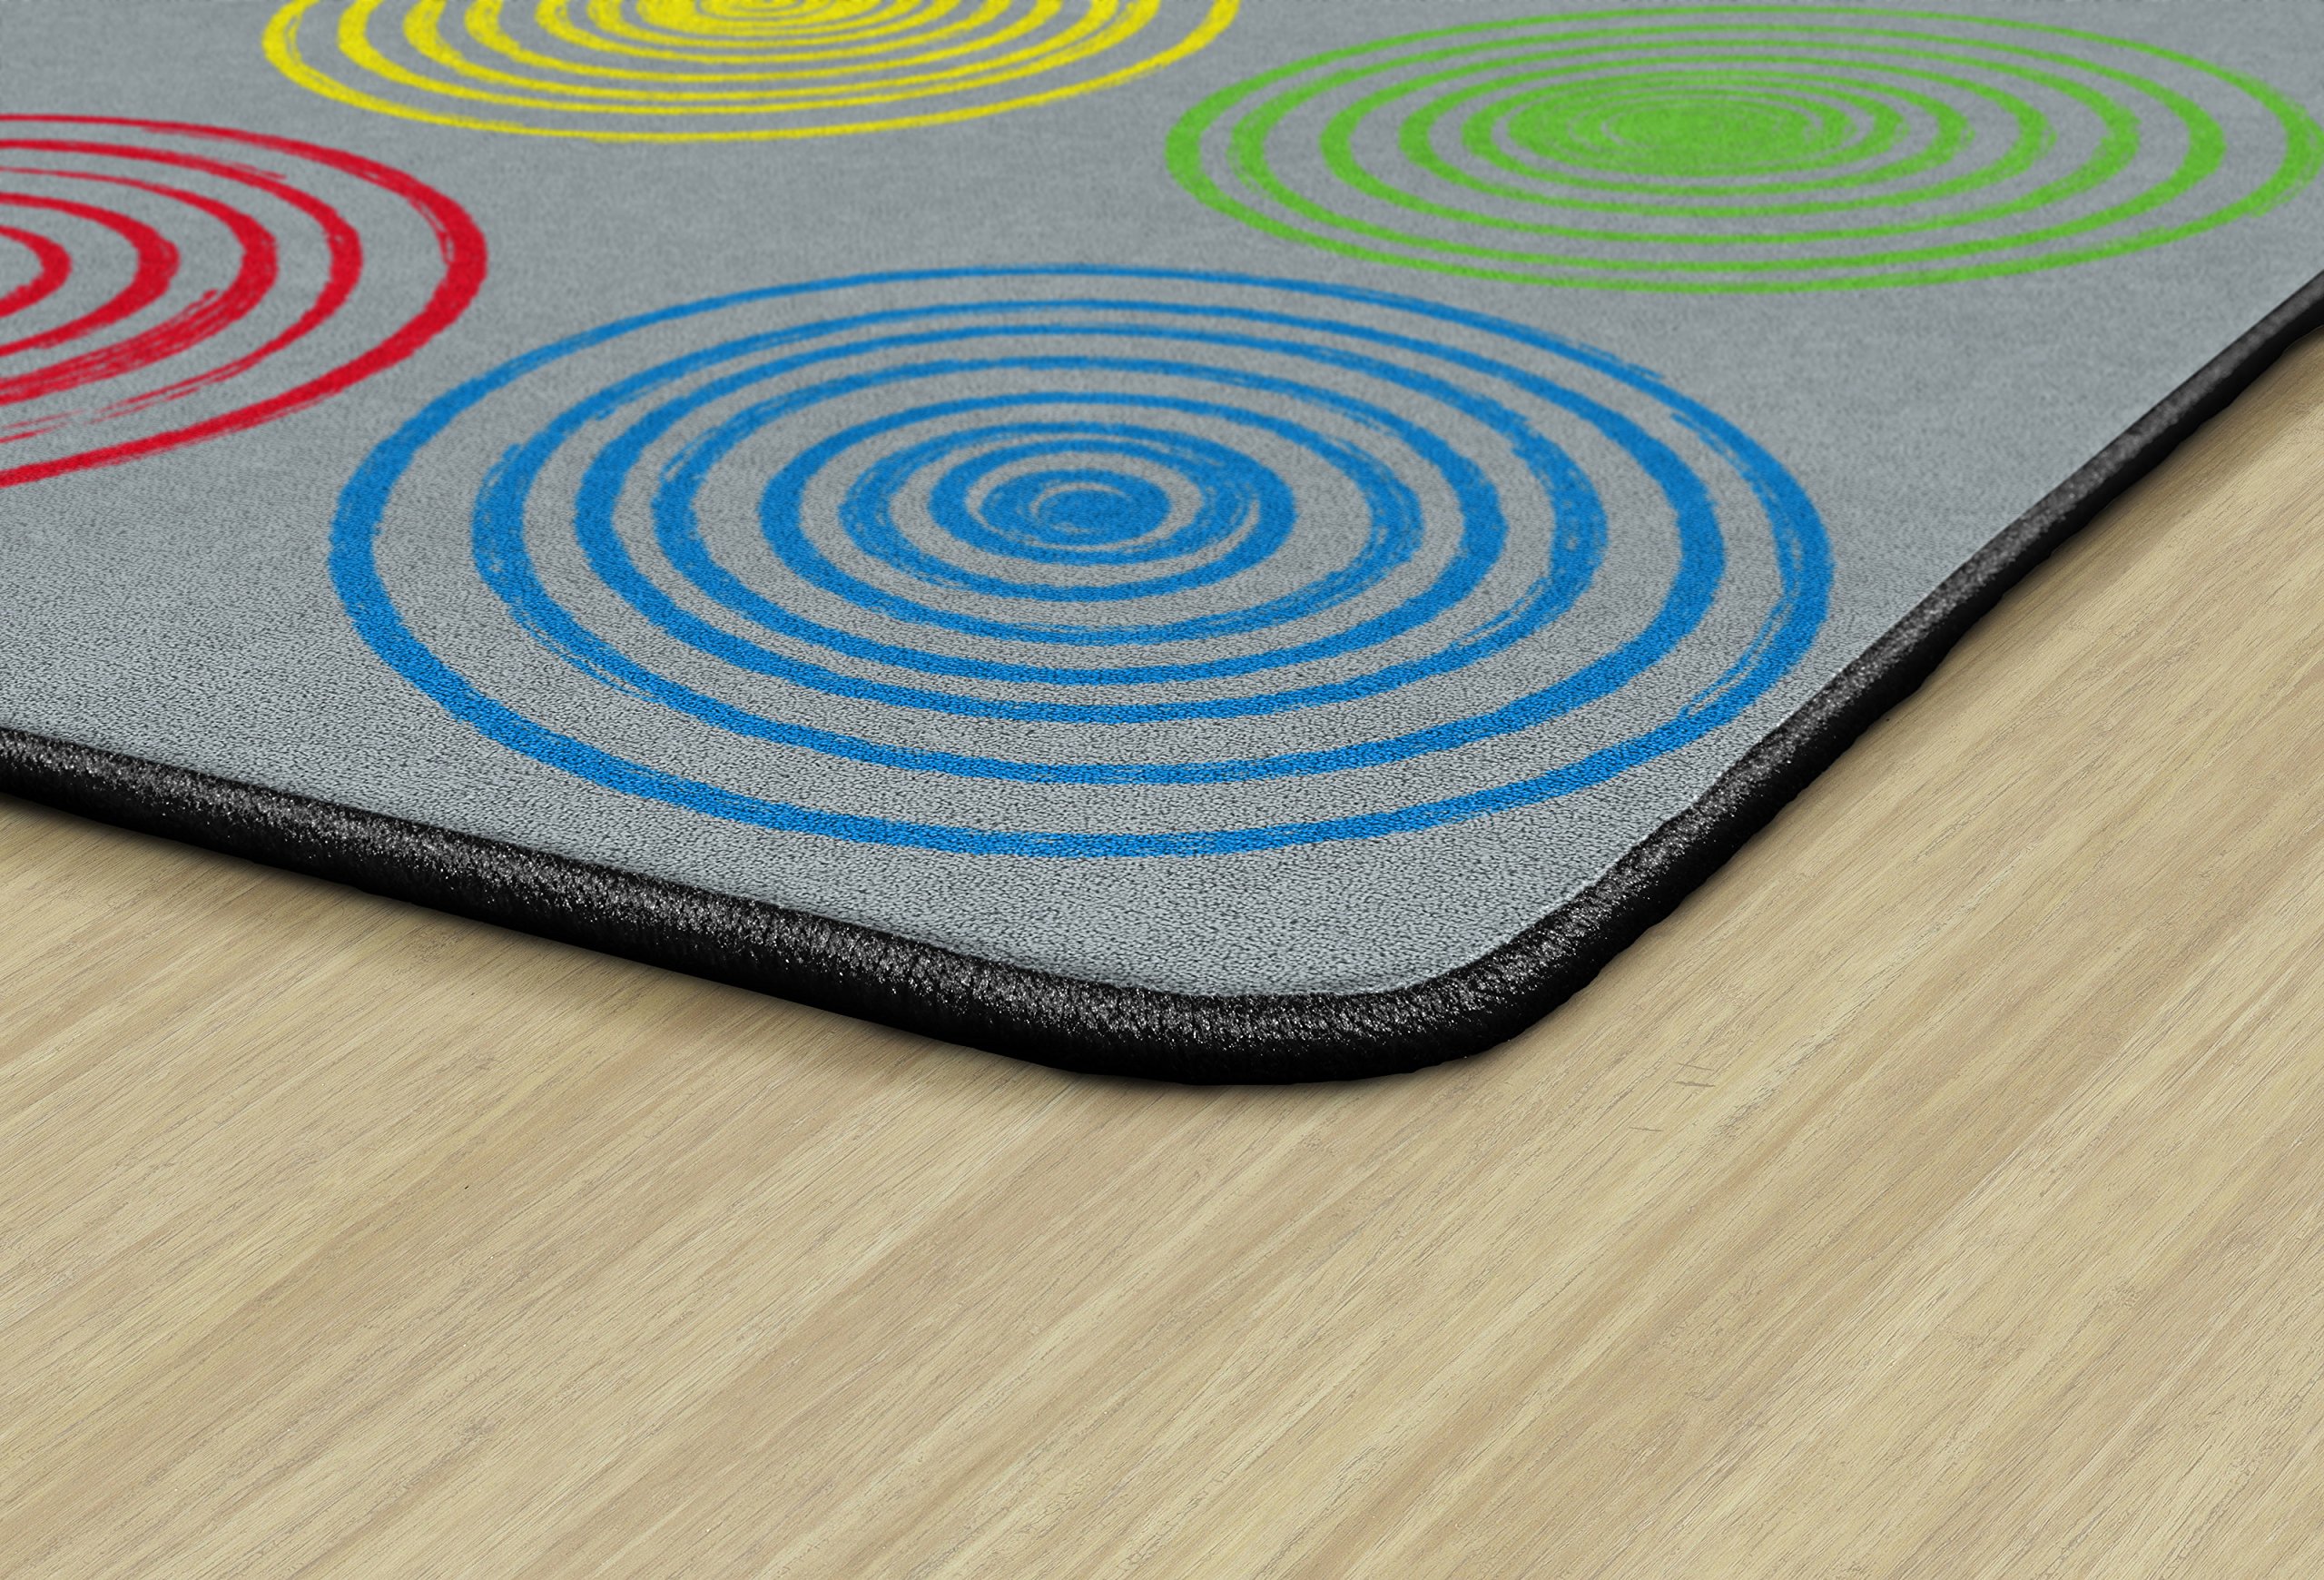 Flagship Carpets Circles Abstract Educational Area Rug for Kids Room Seating Décor, Children's Classroom, Play Carpet for Teaching and Playroom, Seats 24, 7'6